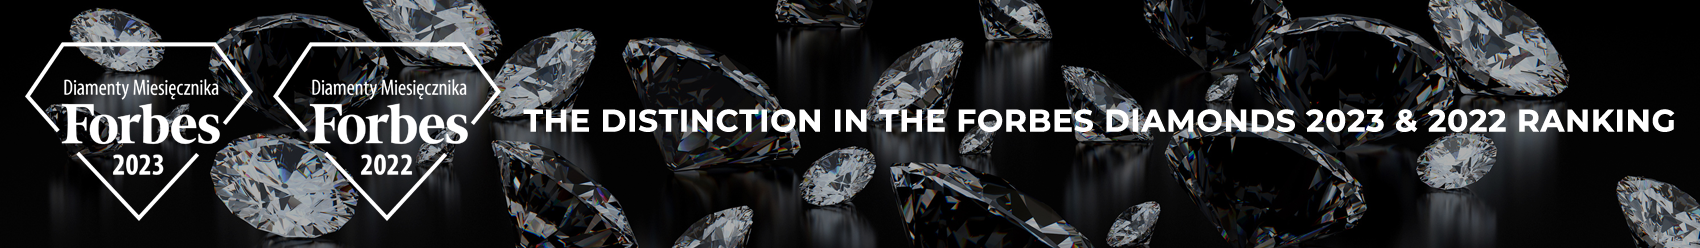 THE DISTINCTION IN THE FORBES DIAMONDS 2023 & 2022 RANKING